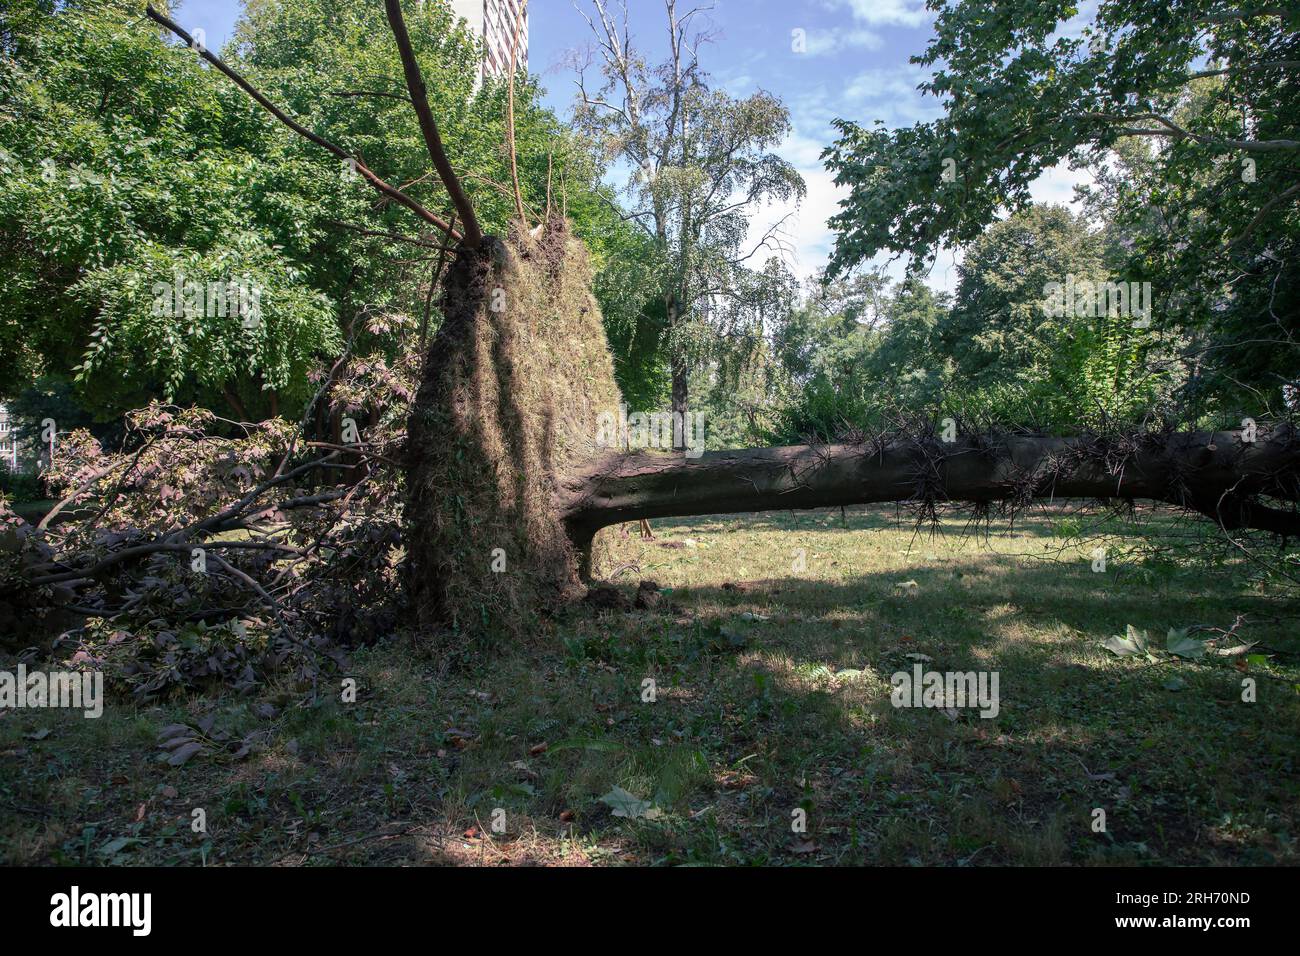 A fallen tree in the park Stock Photo